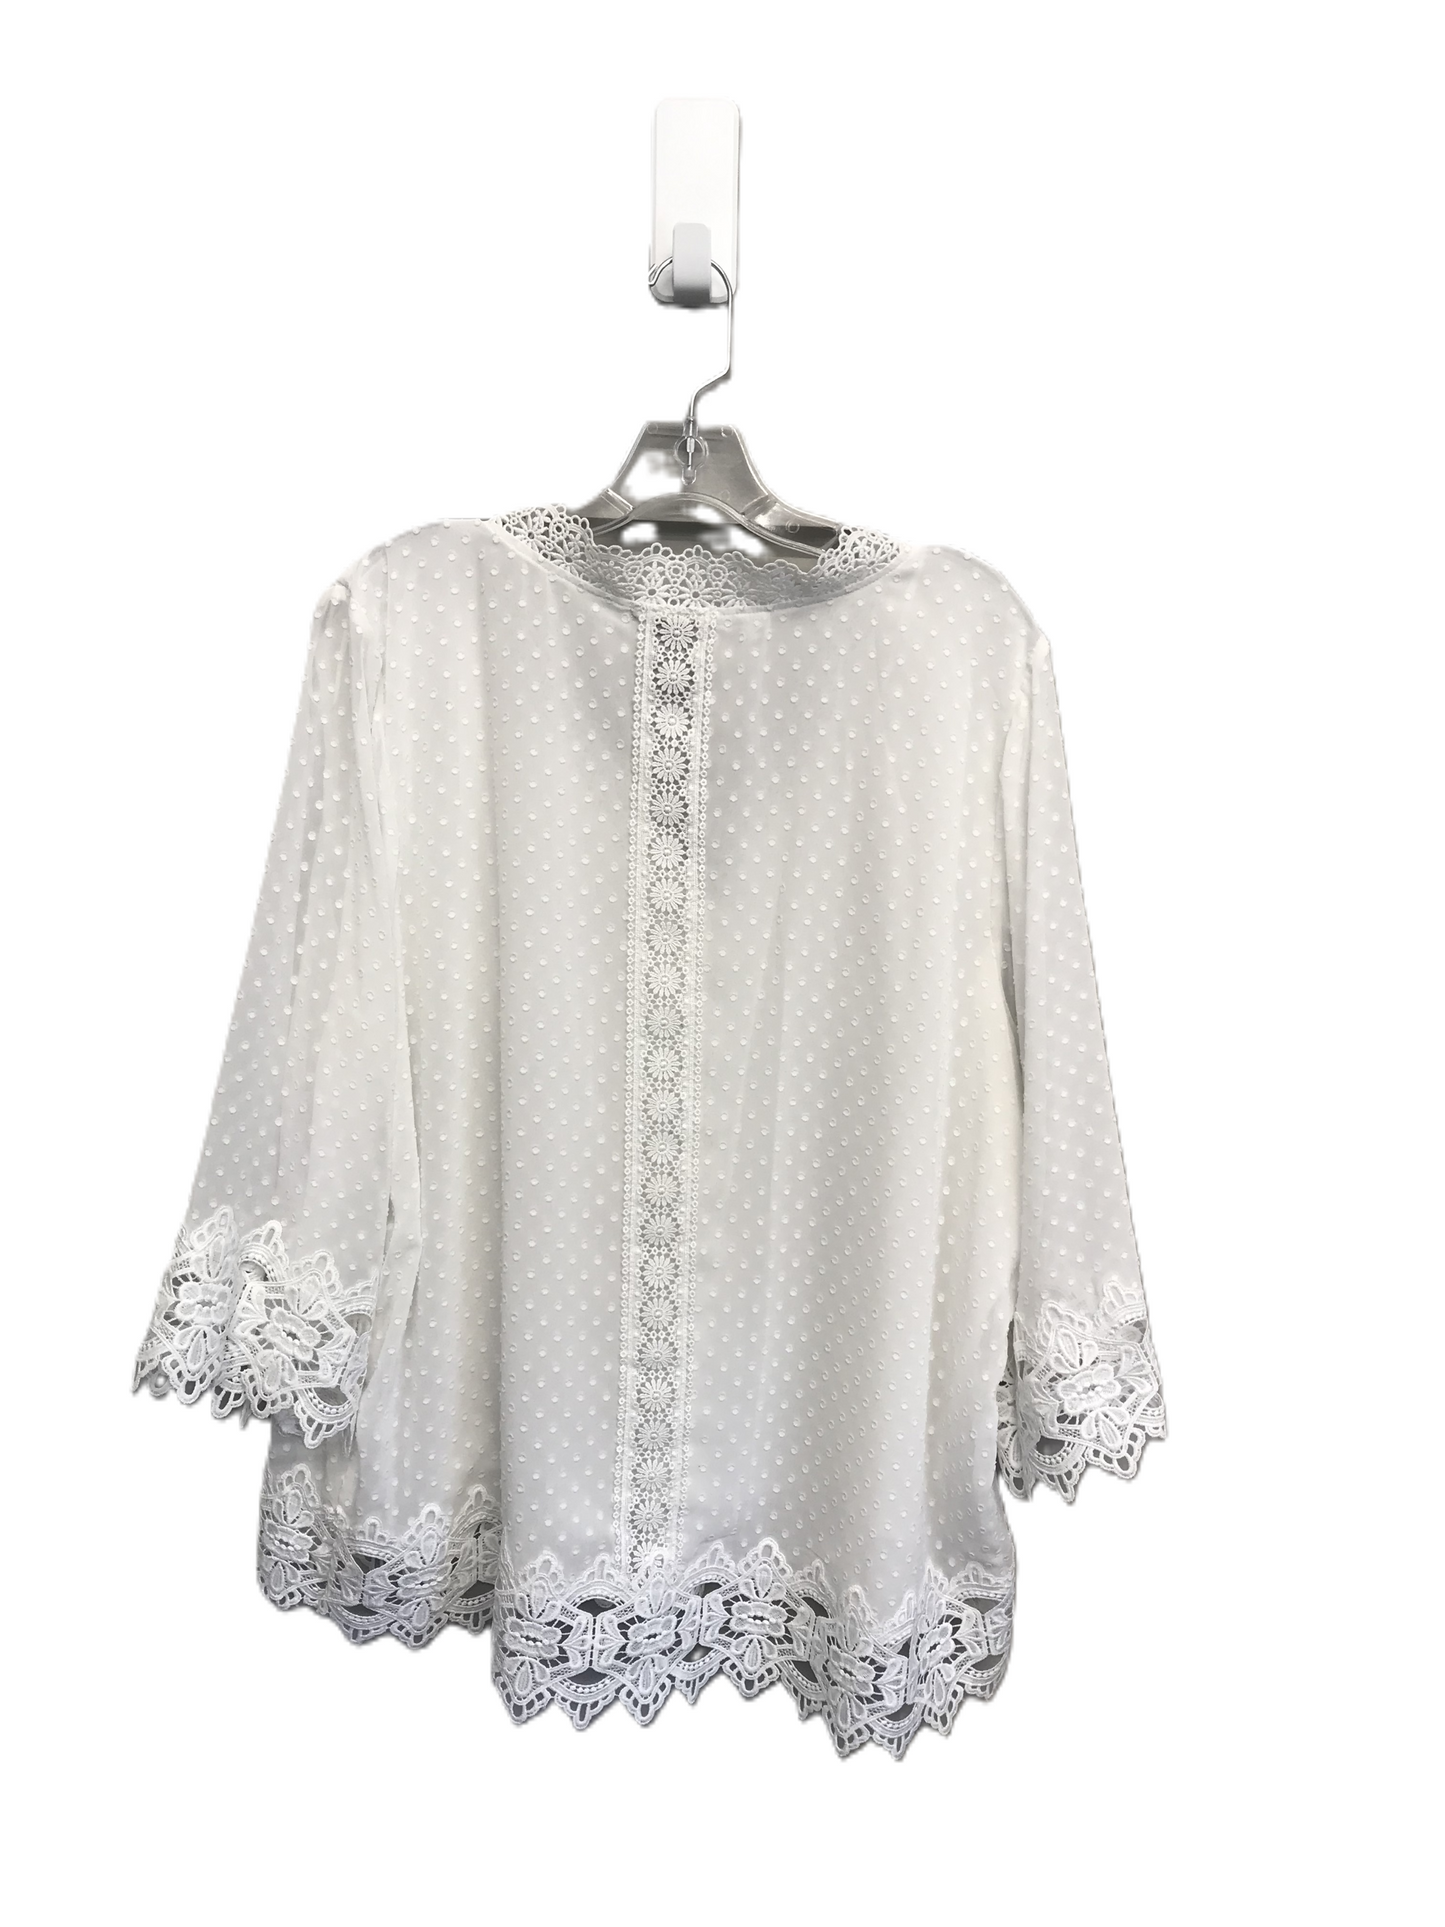 White Top 3/4 Sleeve By Chelsea And Theodore, Size: 2x